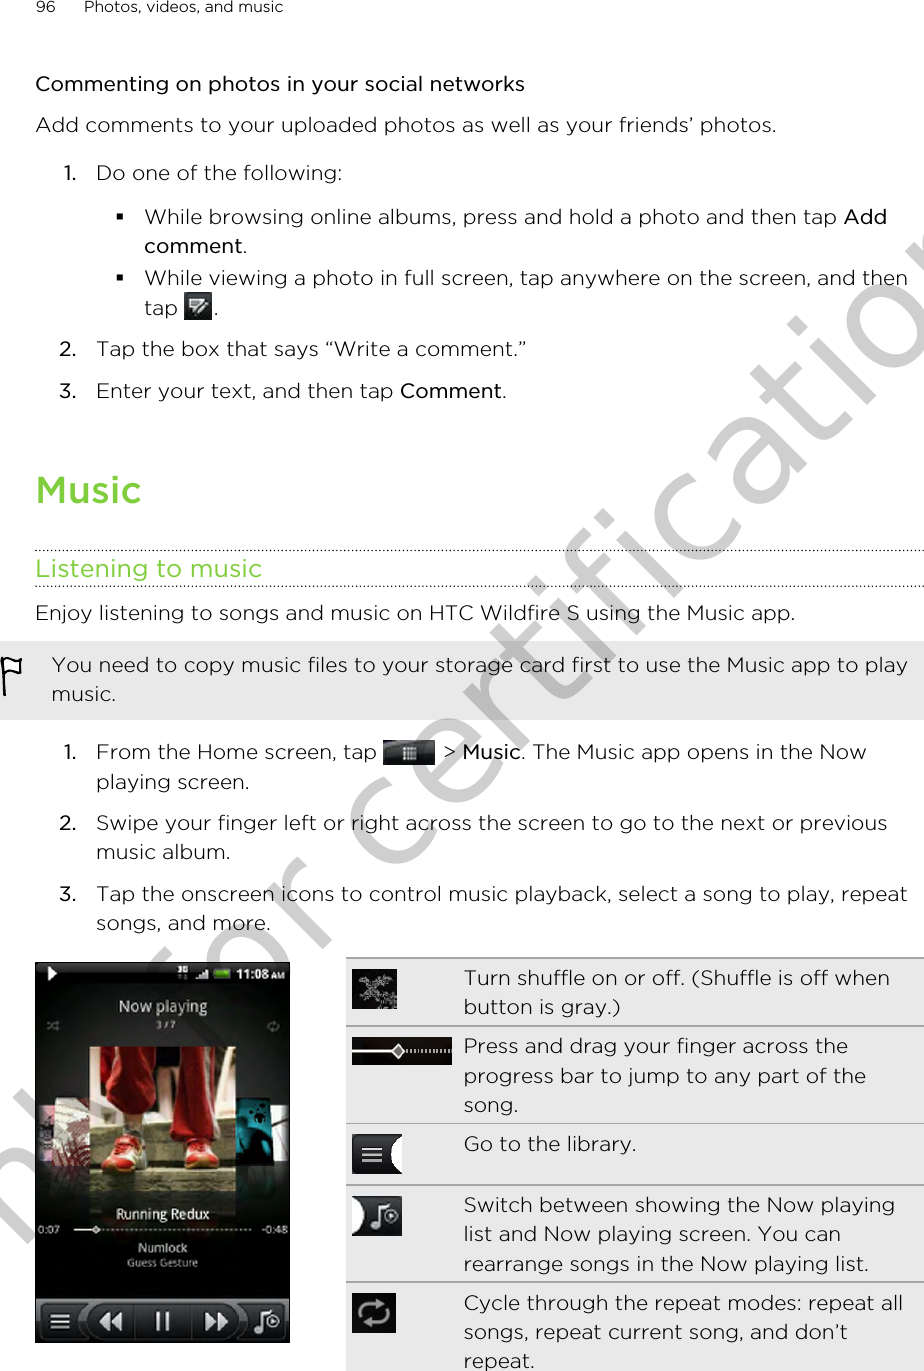 Commenting on photos in your social networksAdd comments to your uploaded photos as well as your friends’ photos.1. Do one of the following:§While browsing online albums, press and hold a photo and then tap Addcomment.§While viewing a photo in full screen, tap anywhere on the screen, and thentap  .2. Tap the box that says “Write a comment.”3. Enter your text, and then tap Comment.MusicListening to musicEnjoy listening to songs and music on HTC Wildfire S using the Music app.You need to copy music files to your storage card first to use the Music app to playmusic.1. From the Home screen, tap   &gt; Music. The Music app opens in the Nowplaying screen.2. Swipe your finger left or right across the screen to go to the next or previousmusic album.3. Tap the onscreen icons to control music playback, select a song to play, repeatsongs, and more.Turn shuffle on or off. (Shuffle is off whenbutton is gray.)Press and drag your finger across theprogress bar to jump to any part of thesong.Go to the library.Switch between showing the Now playinglist and Now playing screen. You canrearrange songs in the Now playing list.Cycle through the repeat modes: repeat allsongs, repeat current song, and don’trepeat.96 Photos, videos, and musicOnly for certification